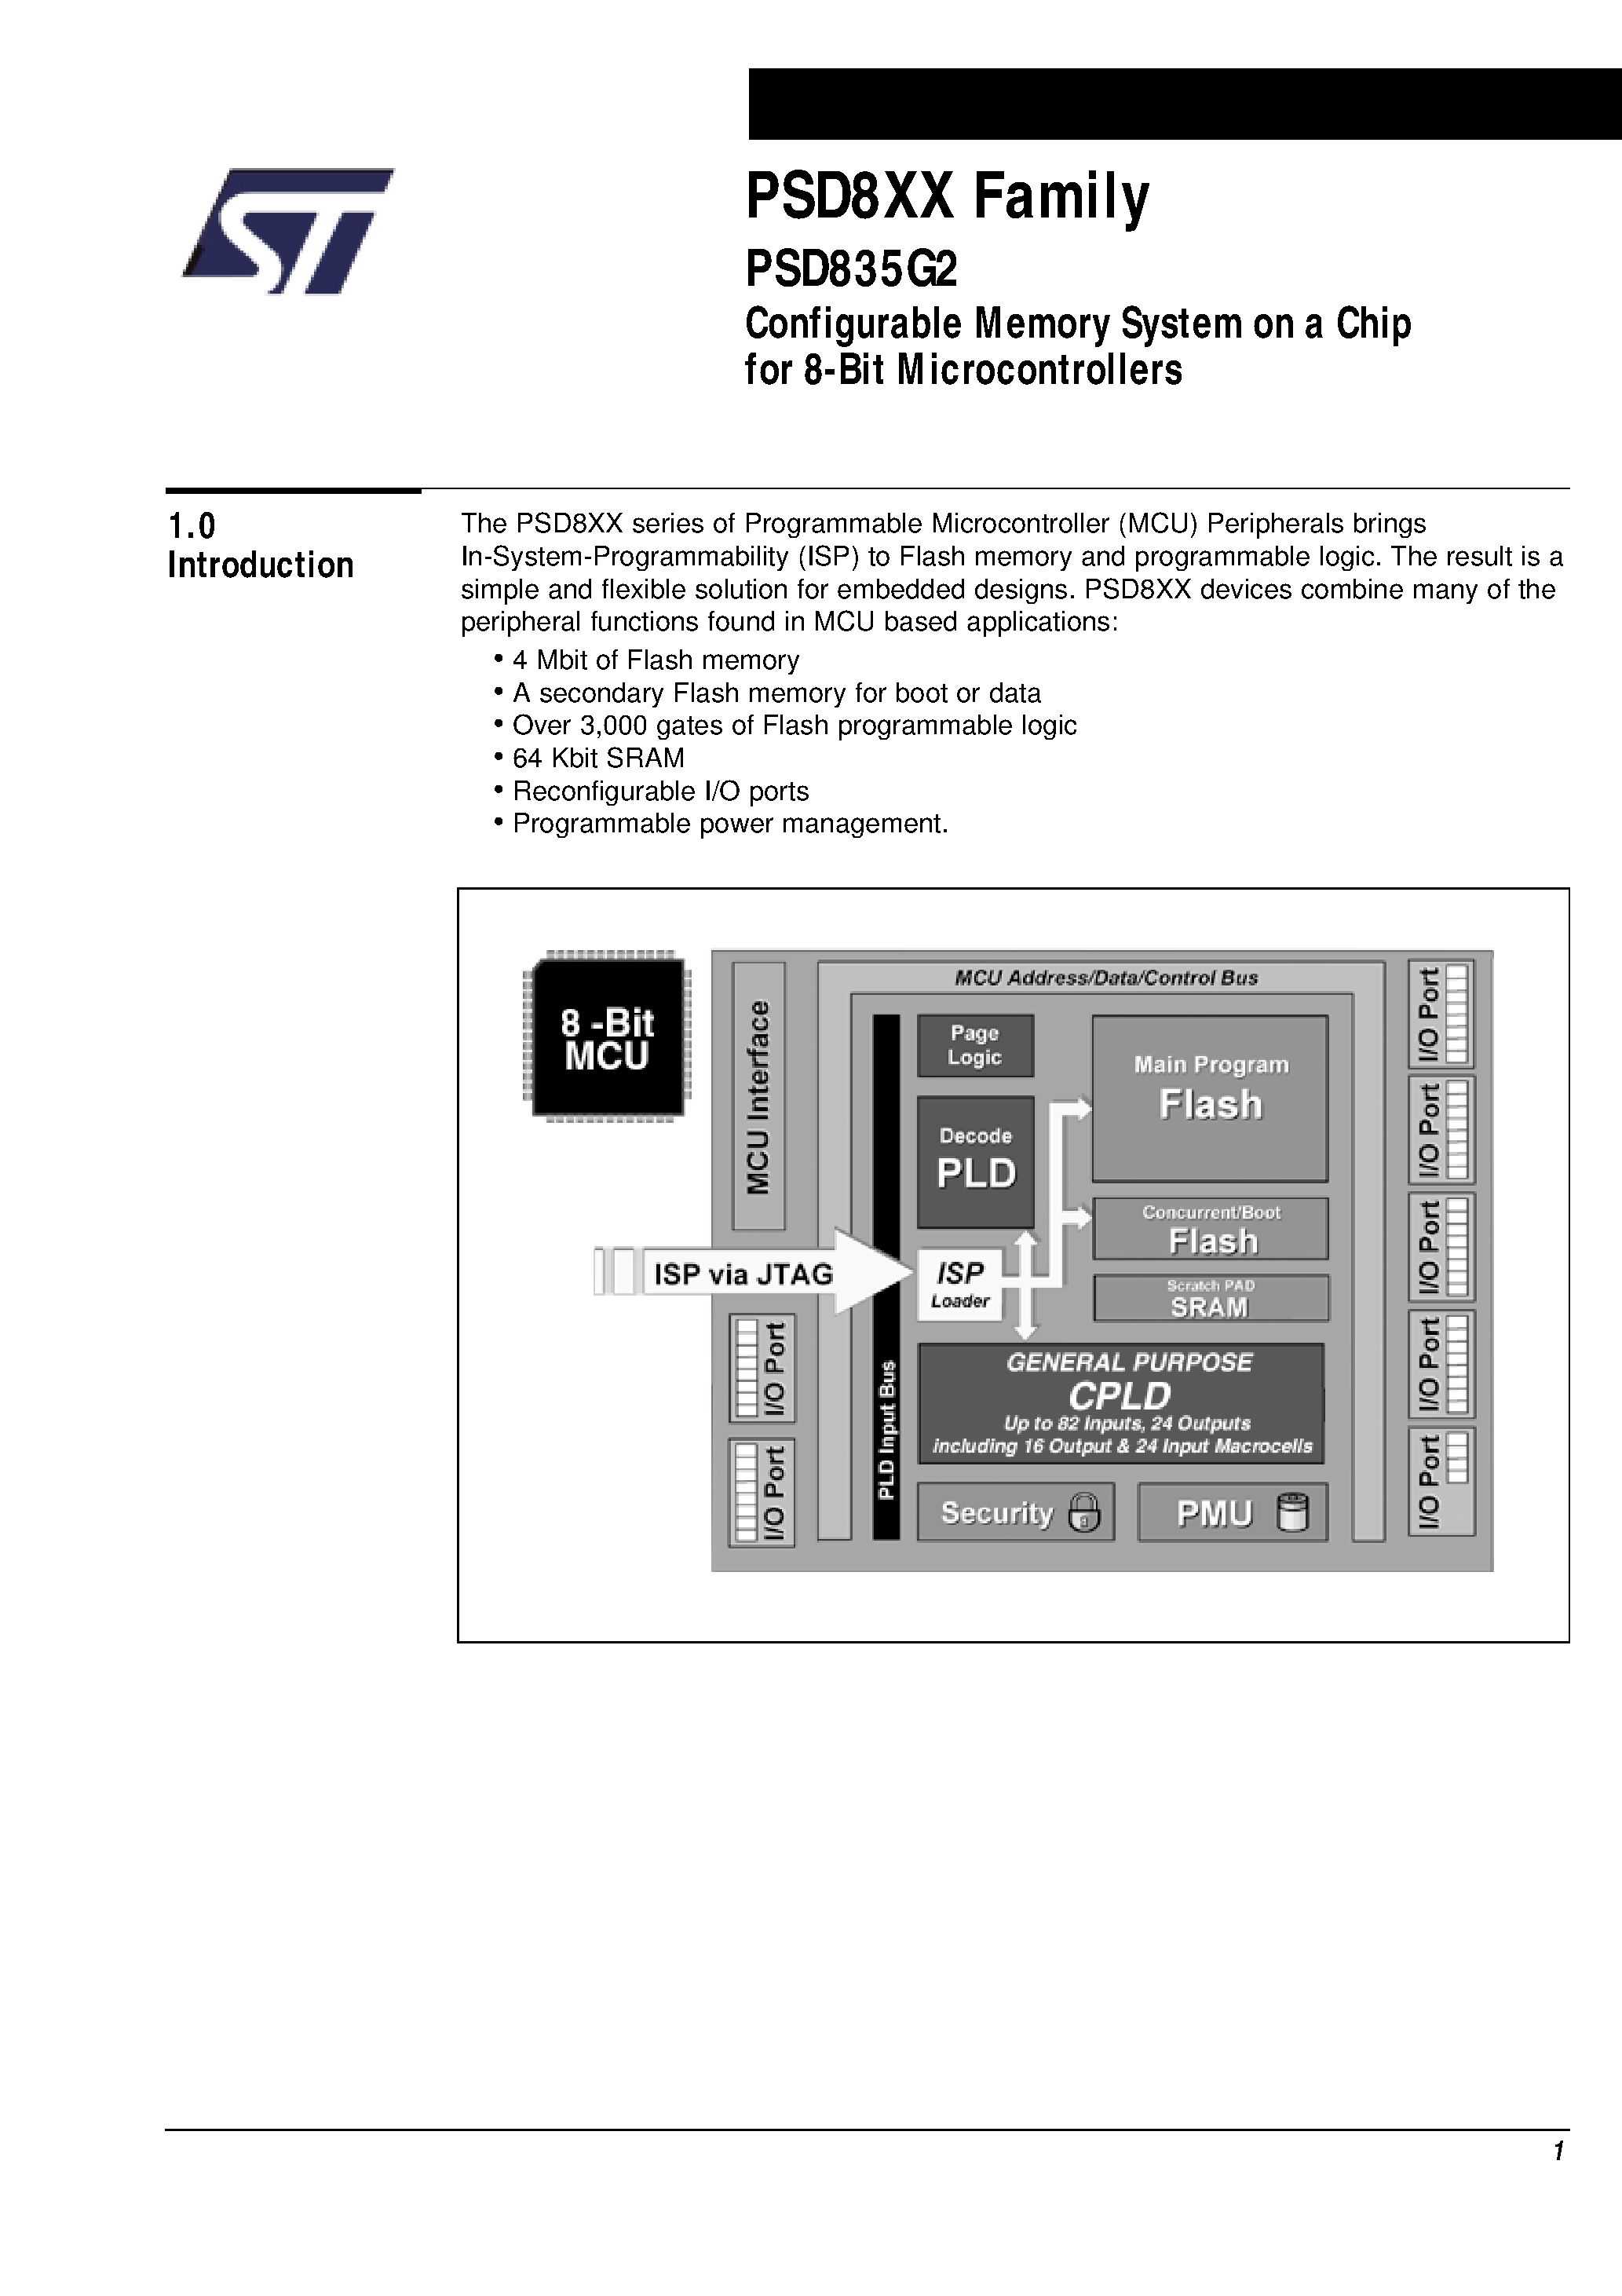 Datasheet PSD835F2V-A-70U - Configurable Memory System on a Chip for 8-Bit Microcontrollers page 2